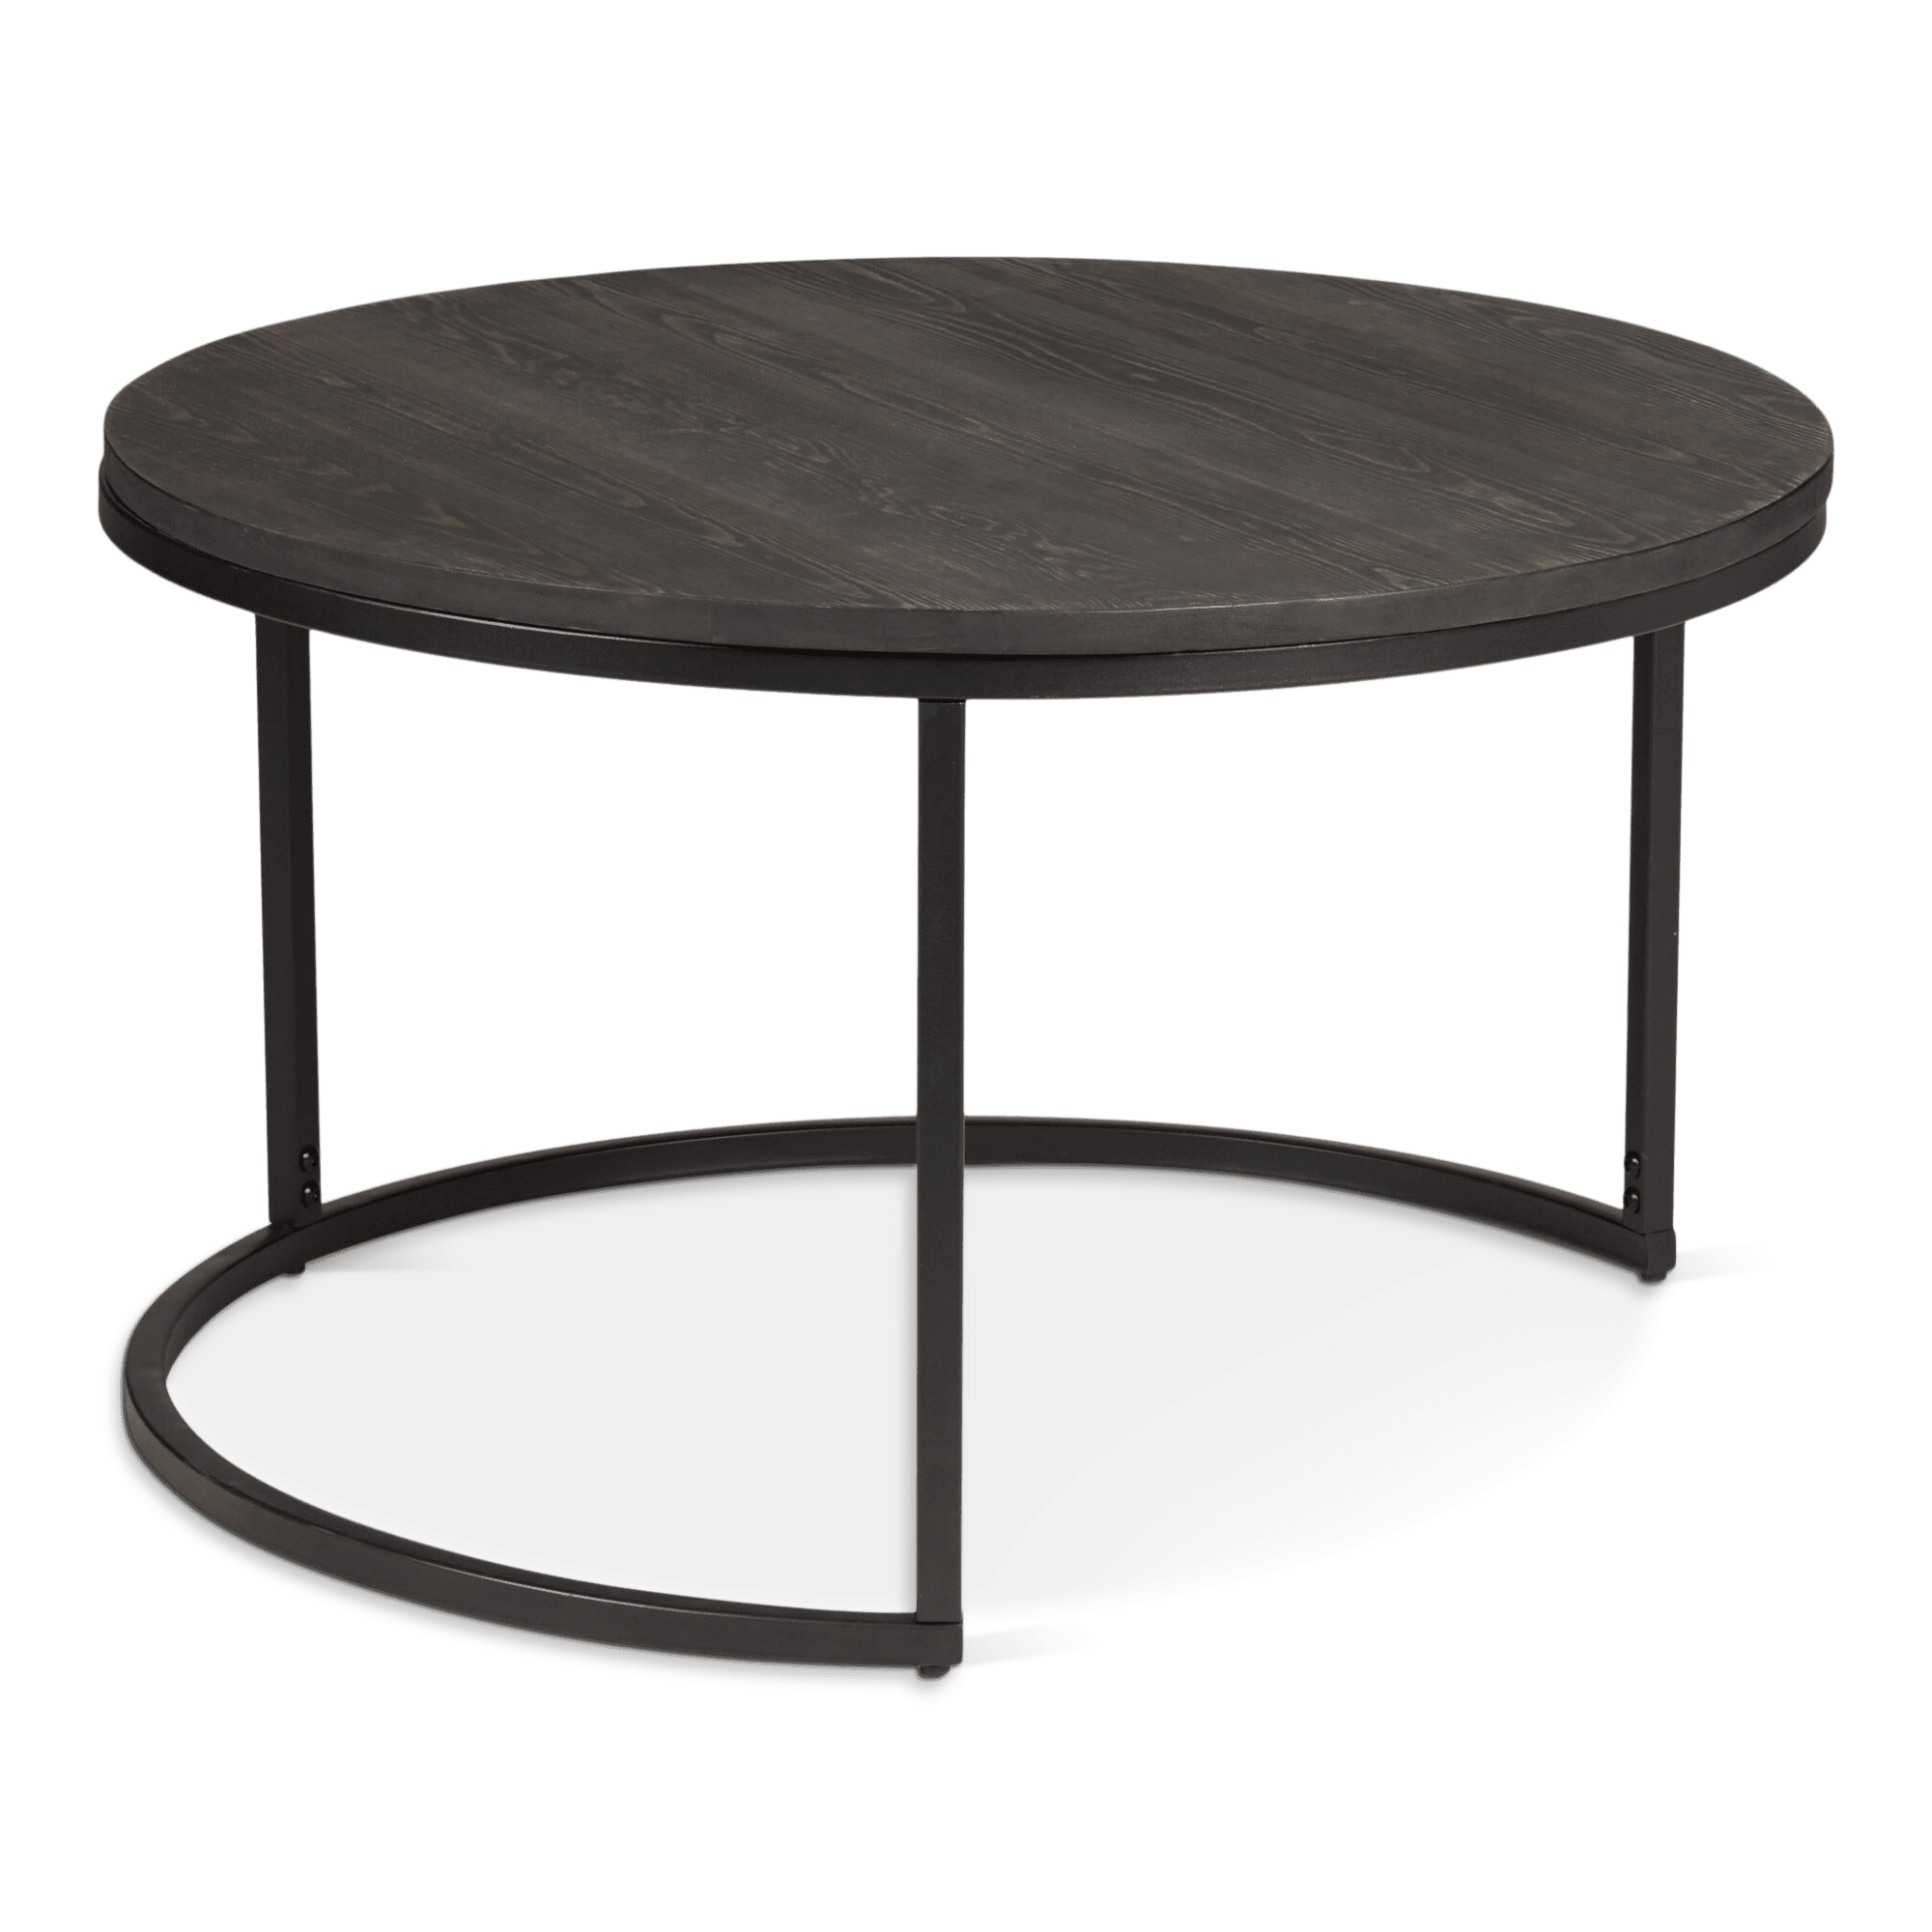 Set of 2 Pine Wood Coffee Tables with Metal Legs